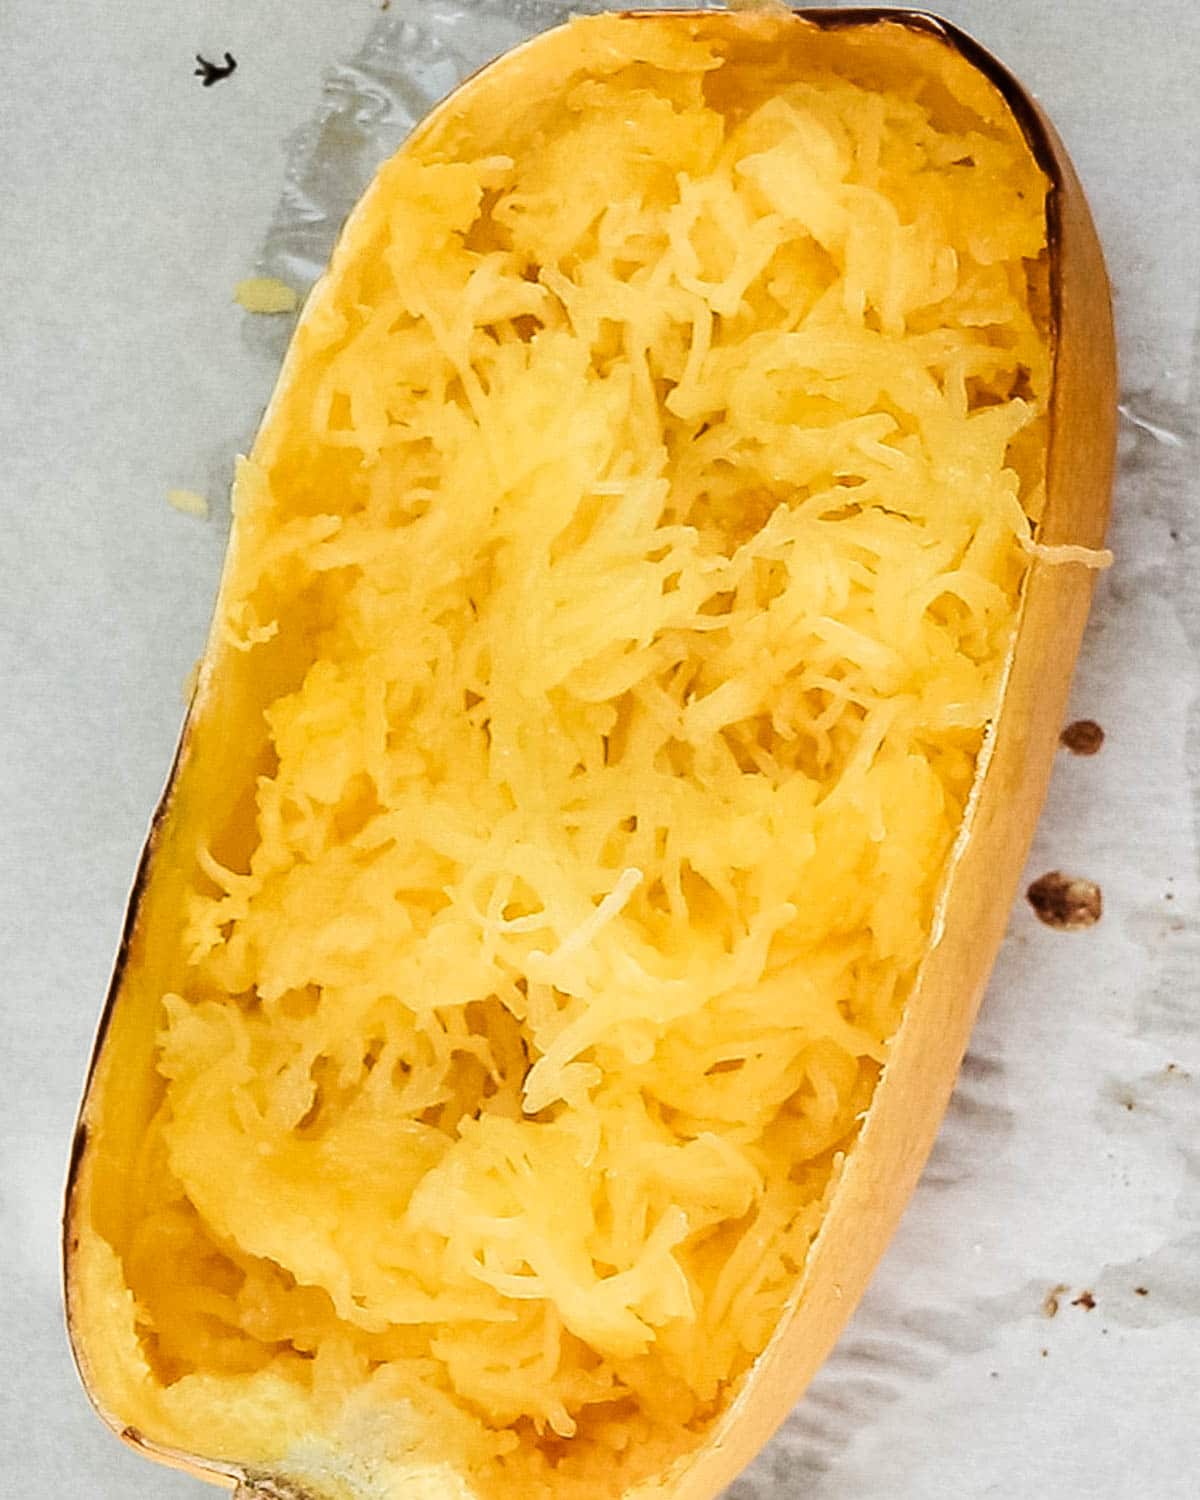 Cooked spaghetti squash served in the rind.